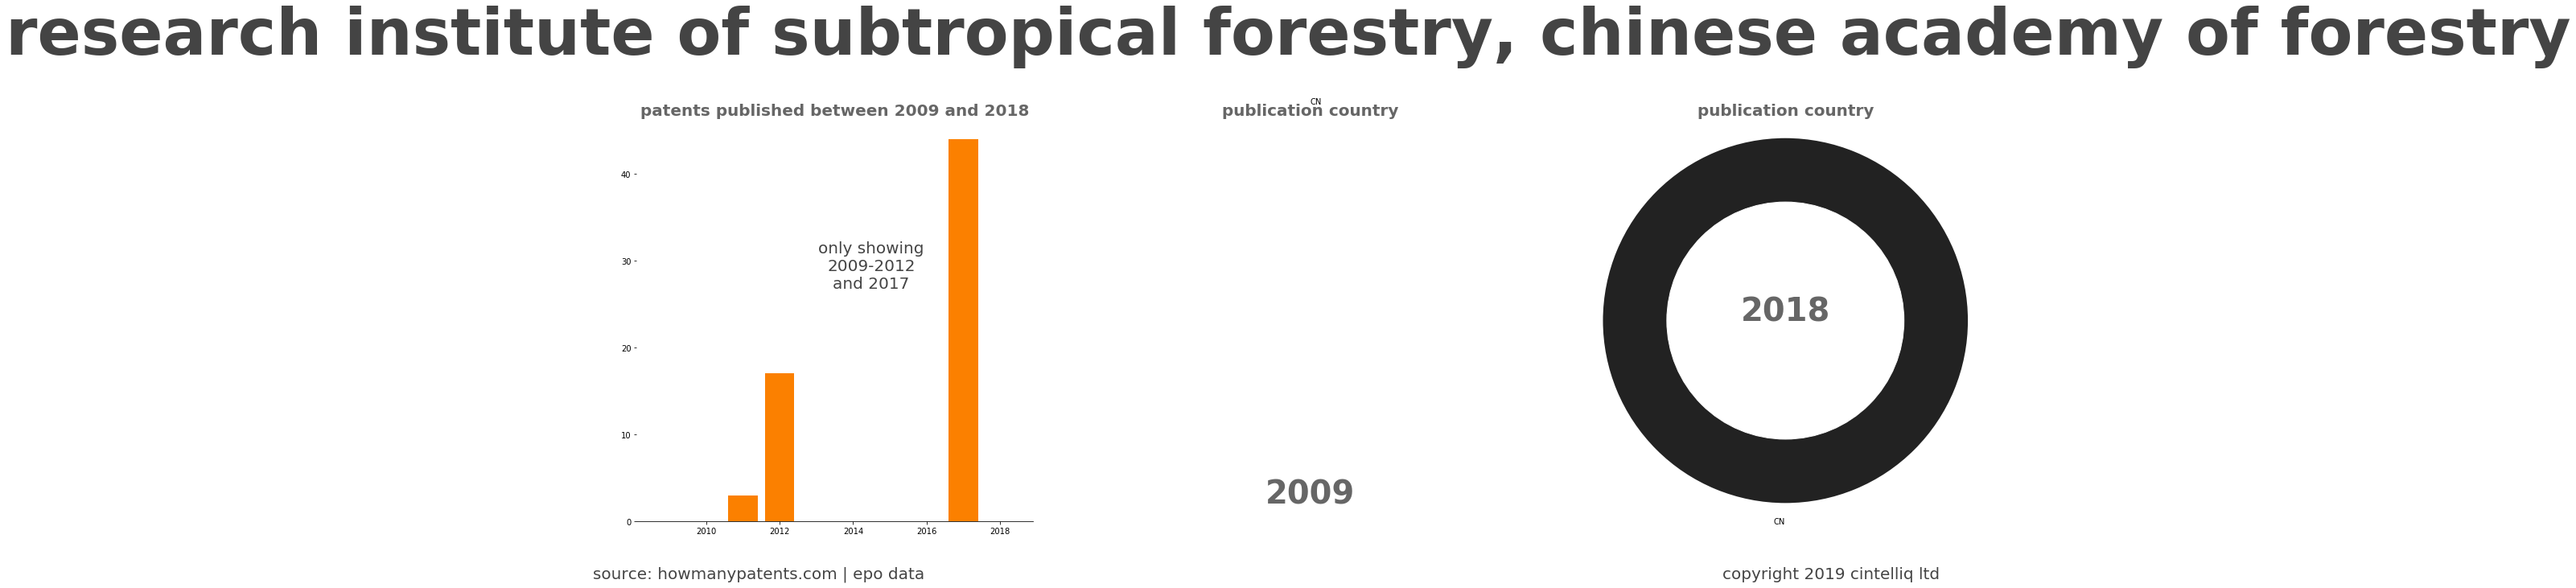 summary of patents for Research Institute Of Subtropical Forestry, Chinese Academy Of Forestry